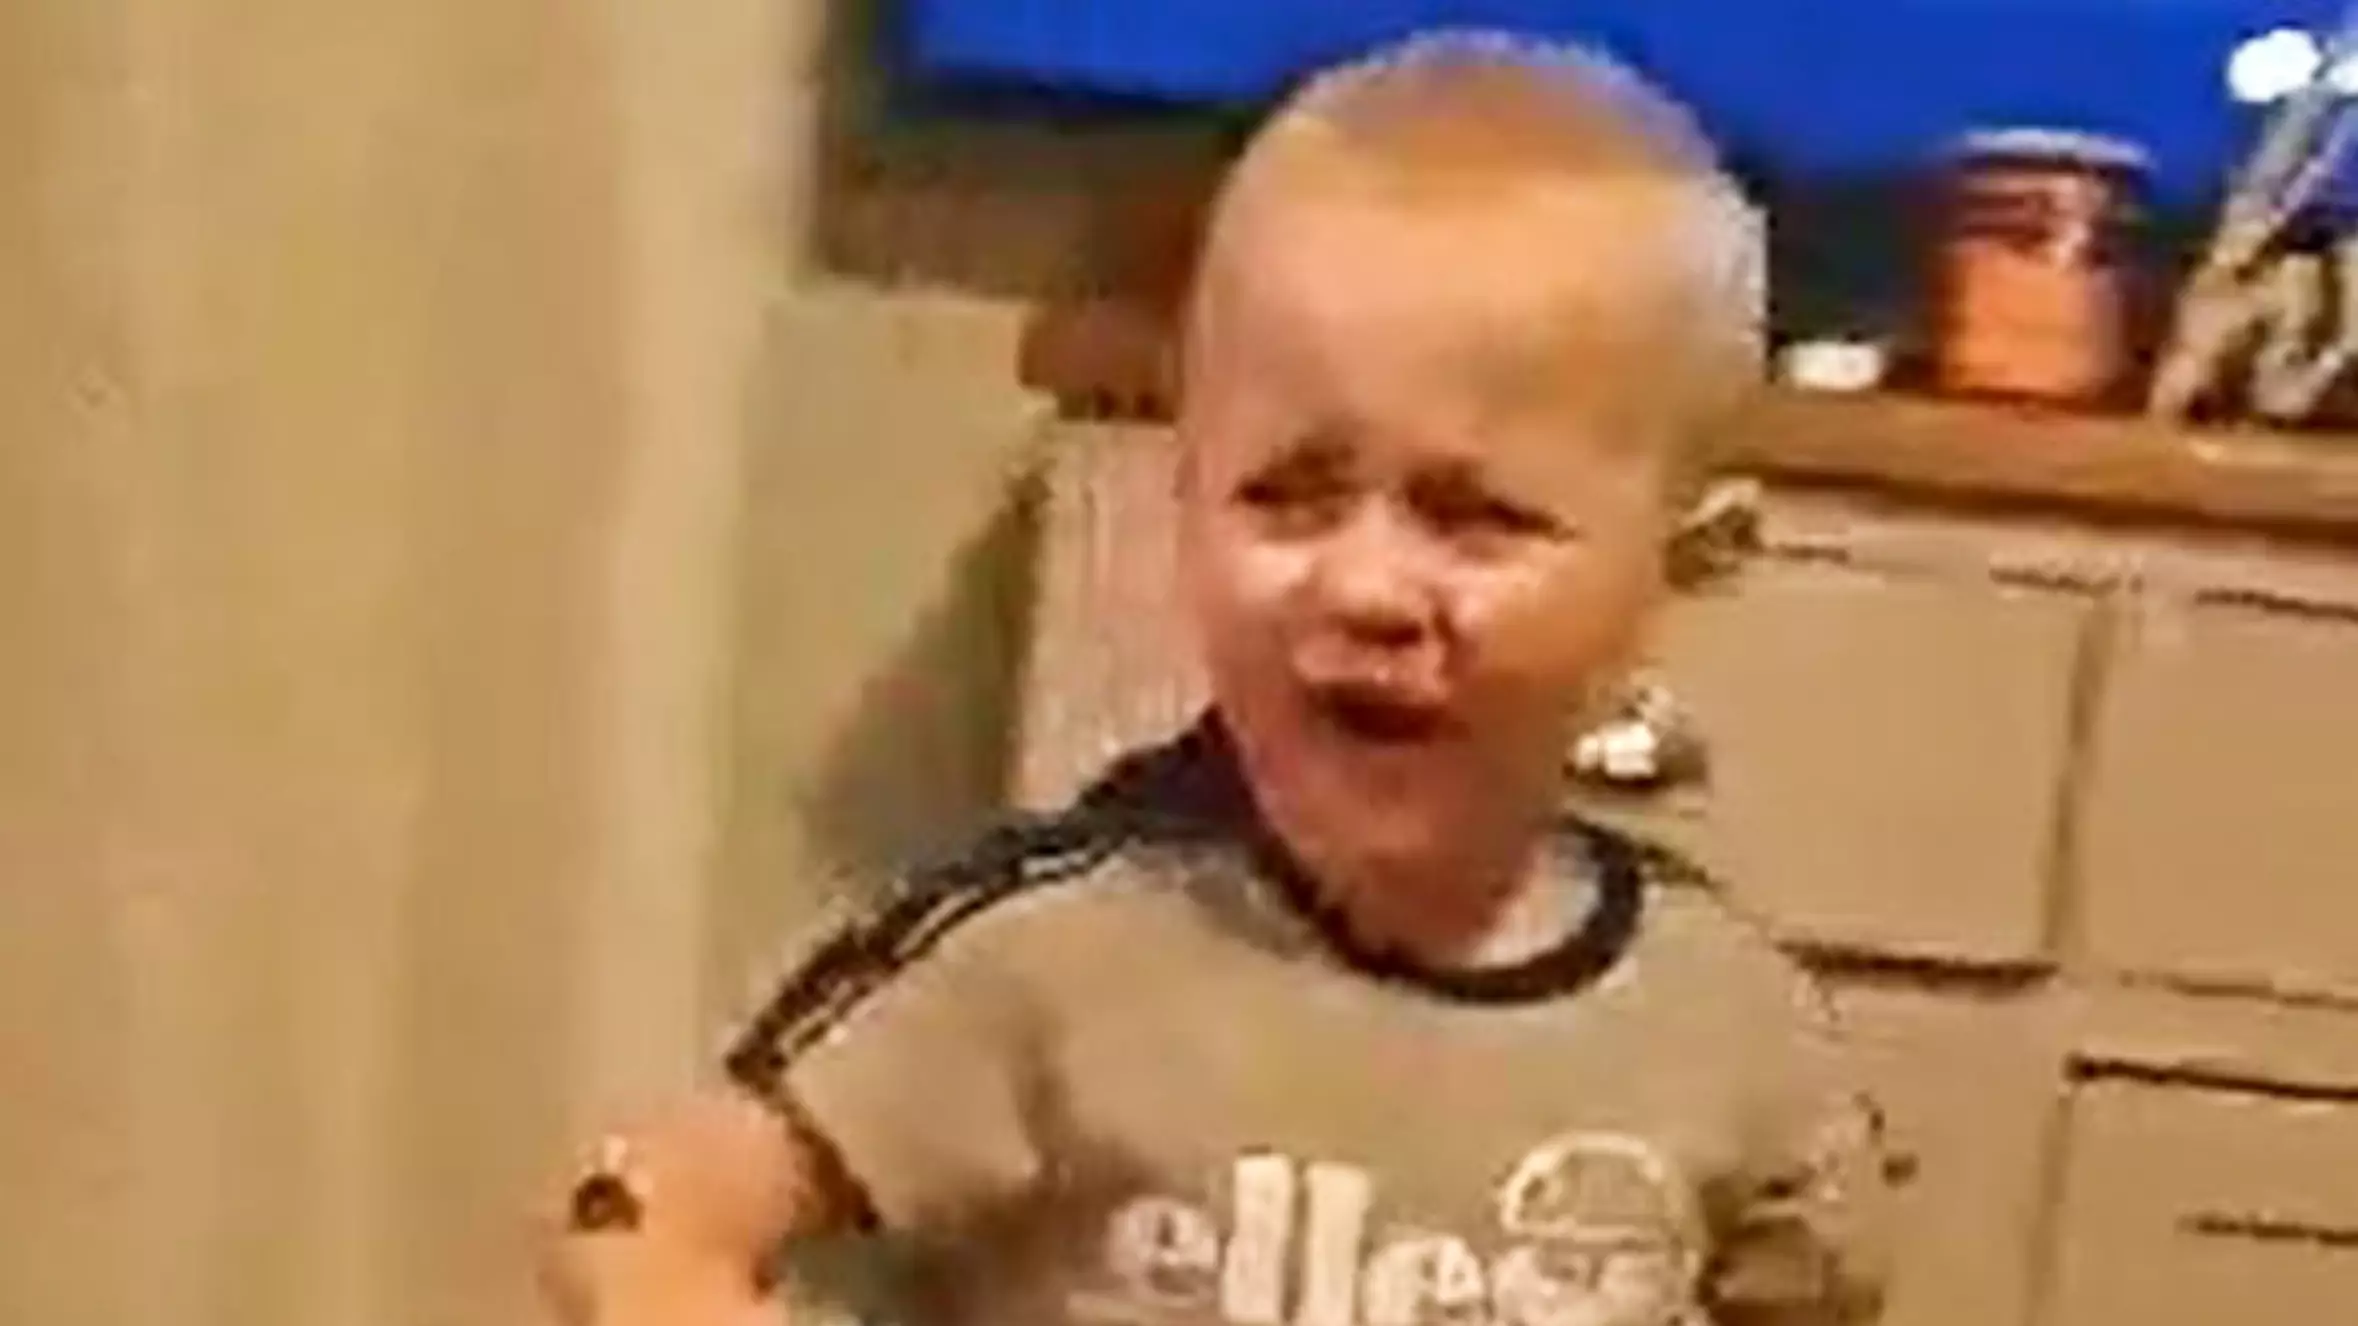 Hilarious Video Of Parents Pranking Their Boy With Nutella Goes Viral